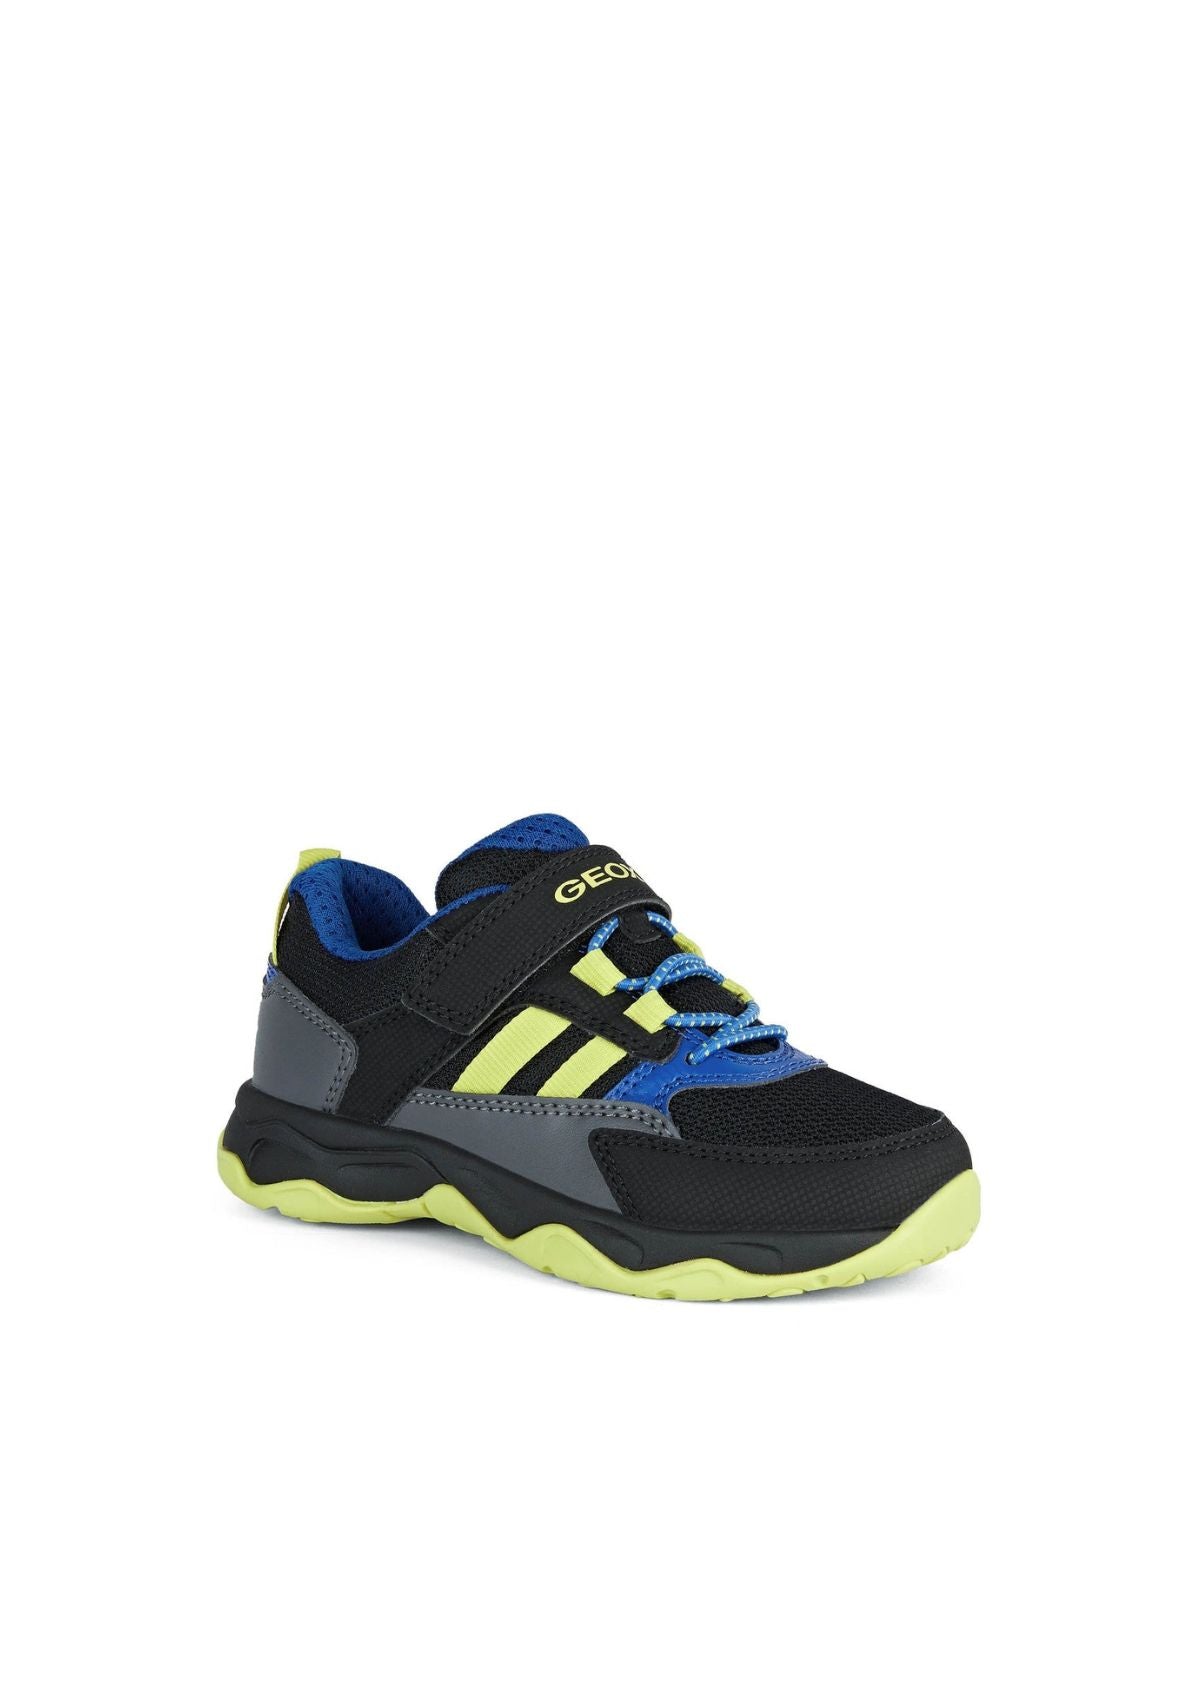 Geox Boys CALCO Trainers Black Lime  front